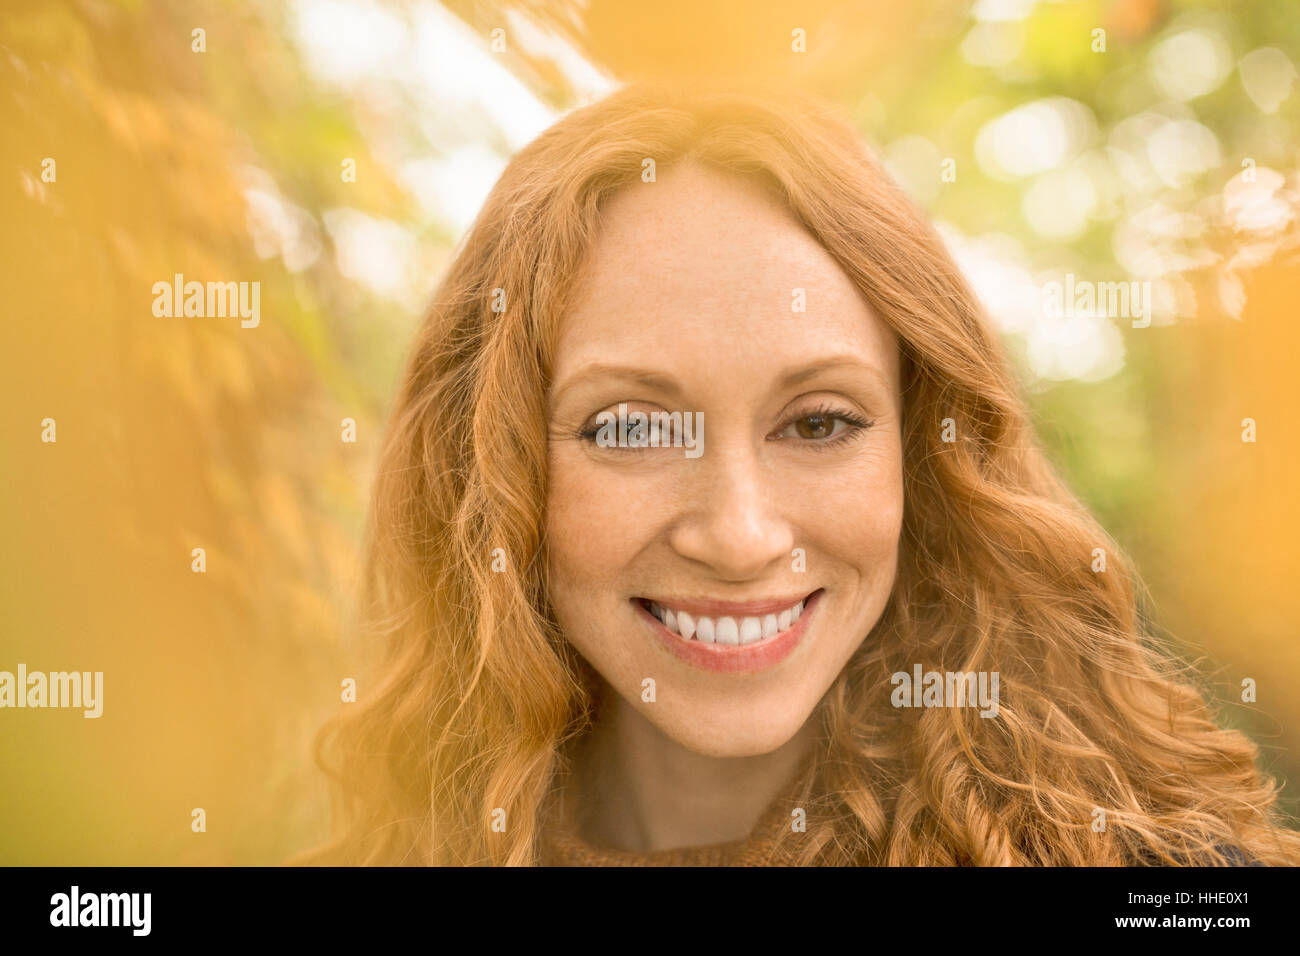 Close up portrait smiling woman with red hair Stock Photo